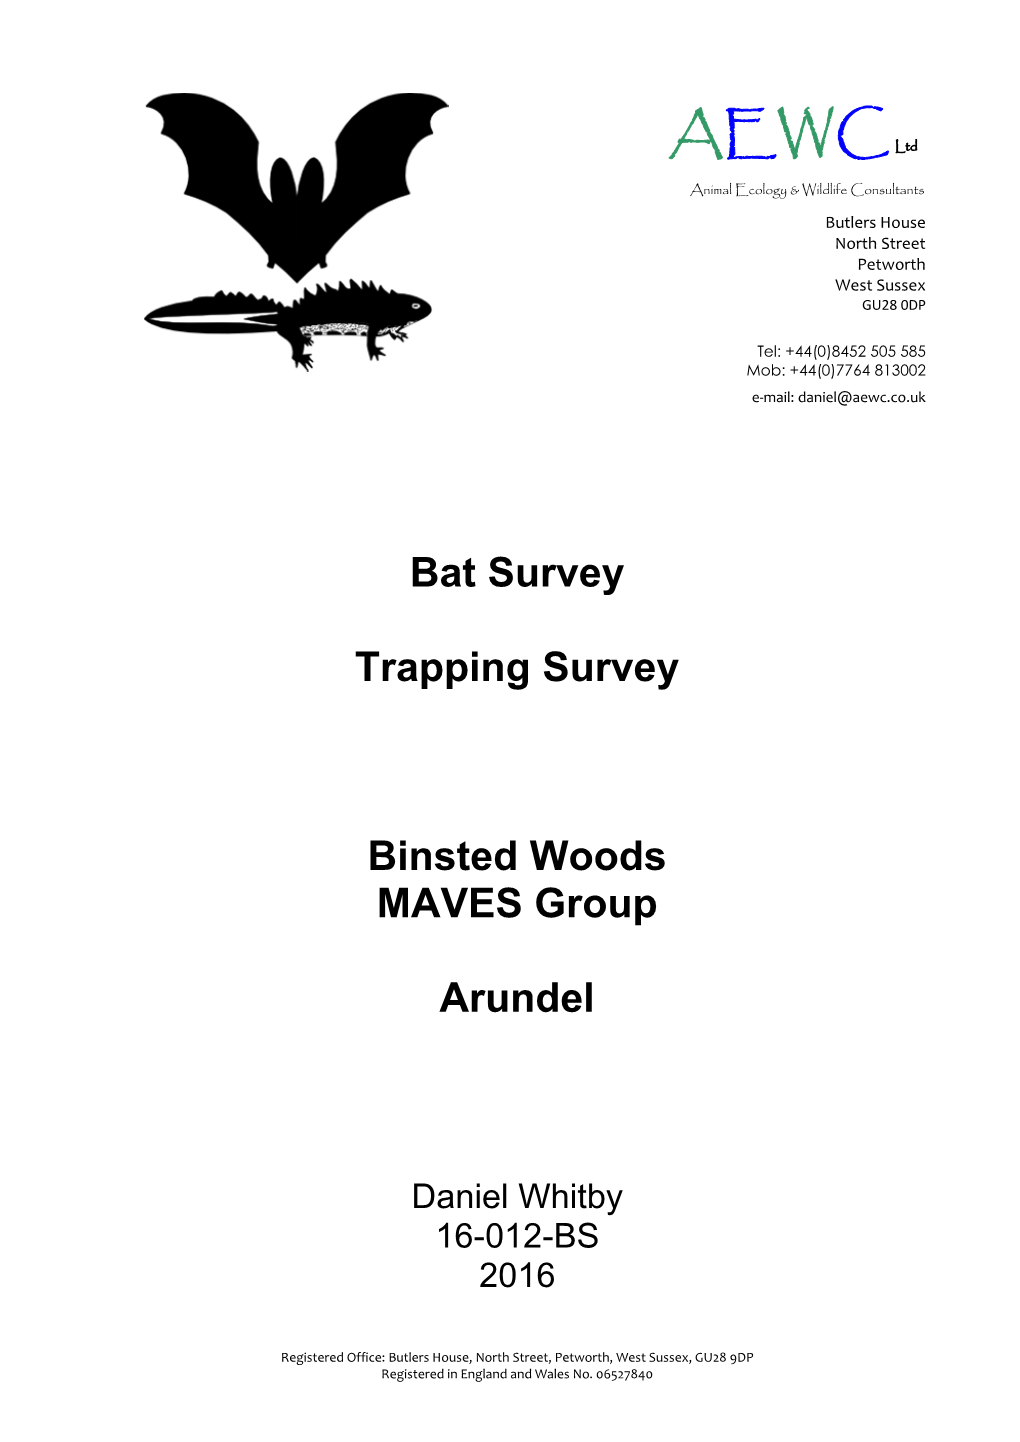 2.2 Binsted Woods Bat Trapping Survey by Daniel Whitby of Animal Ecology & Wildlife Consultants